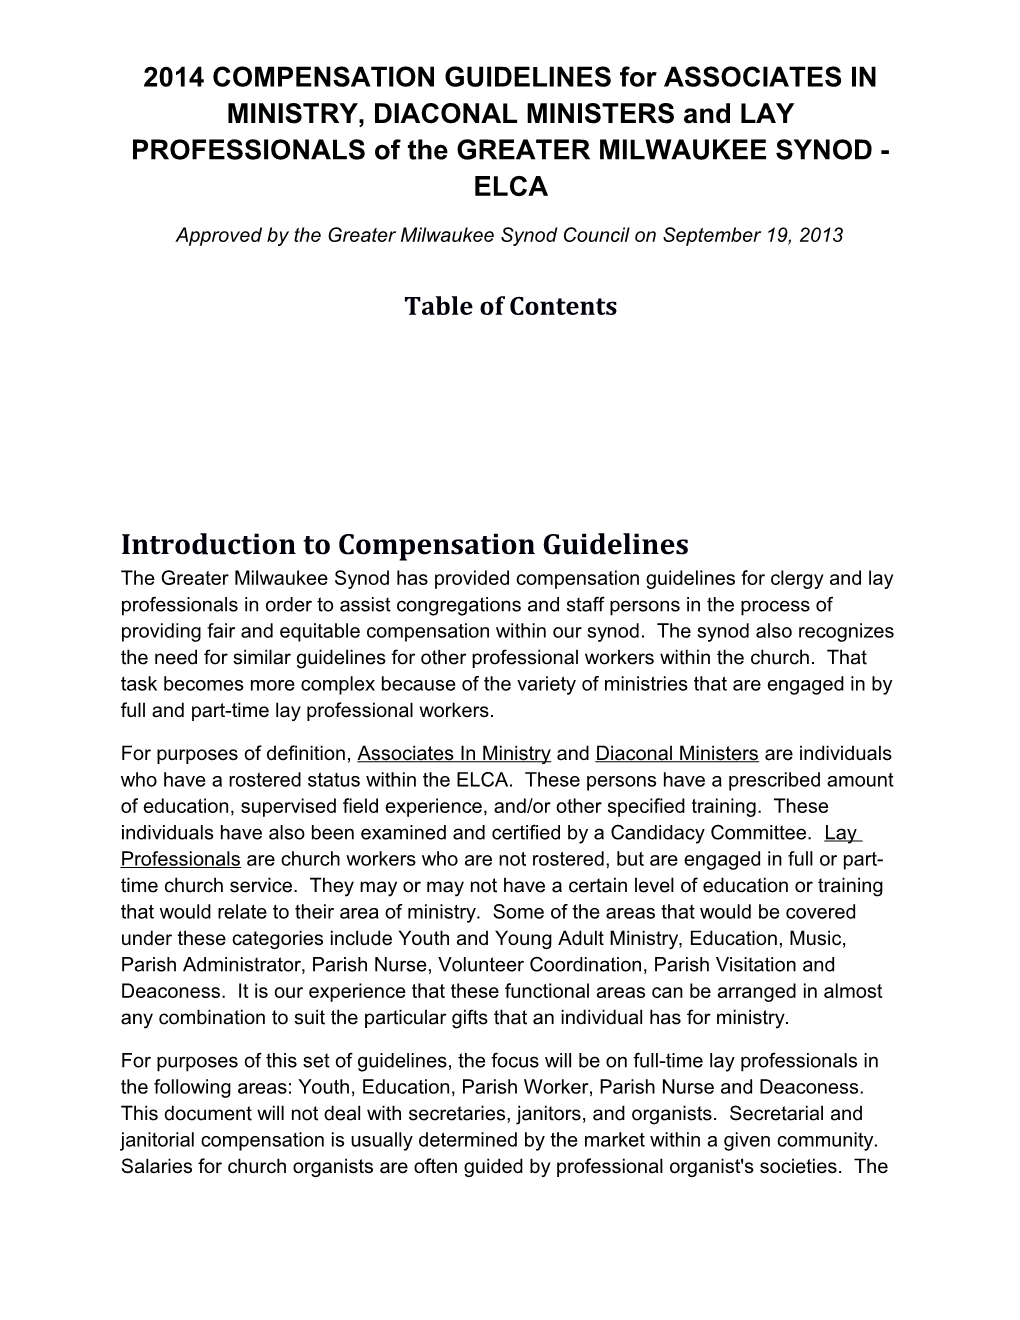 2014 Compensation Guidelines for Associates in Ministry, Diaconal Ministers and Lay